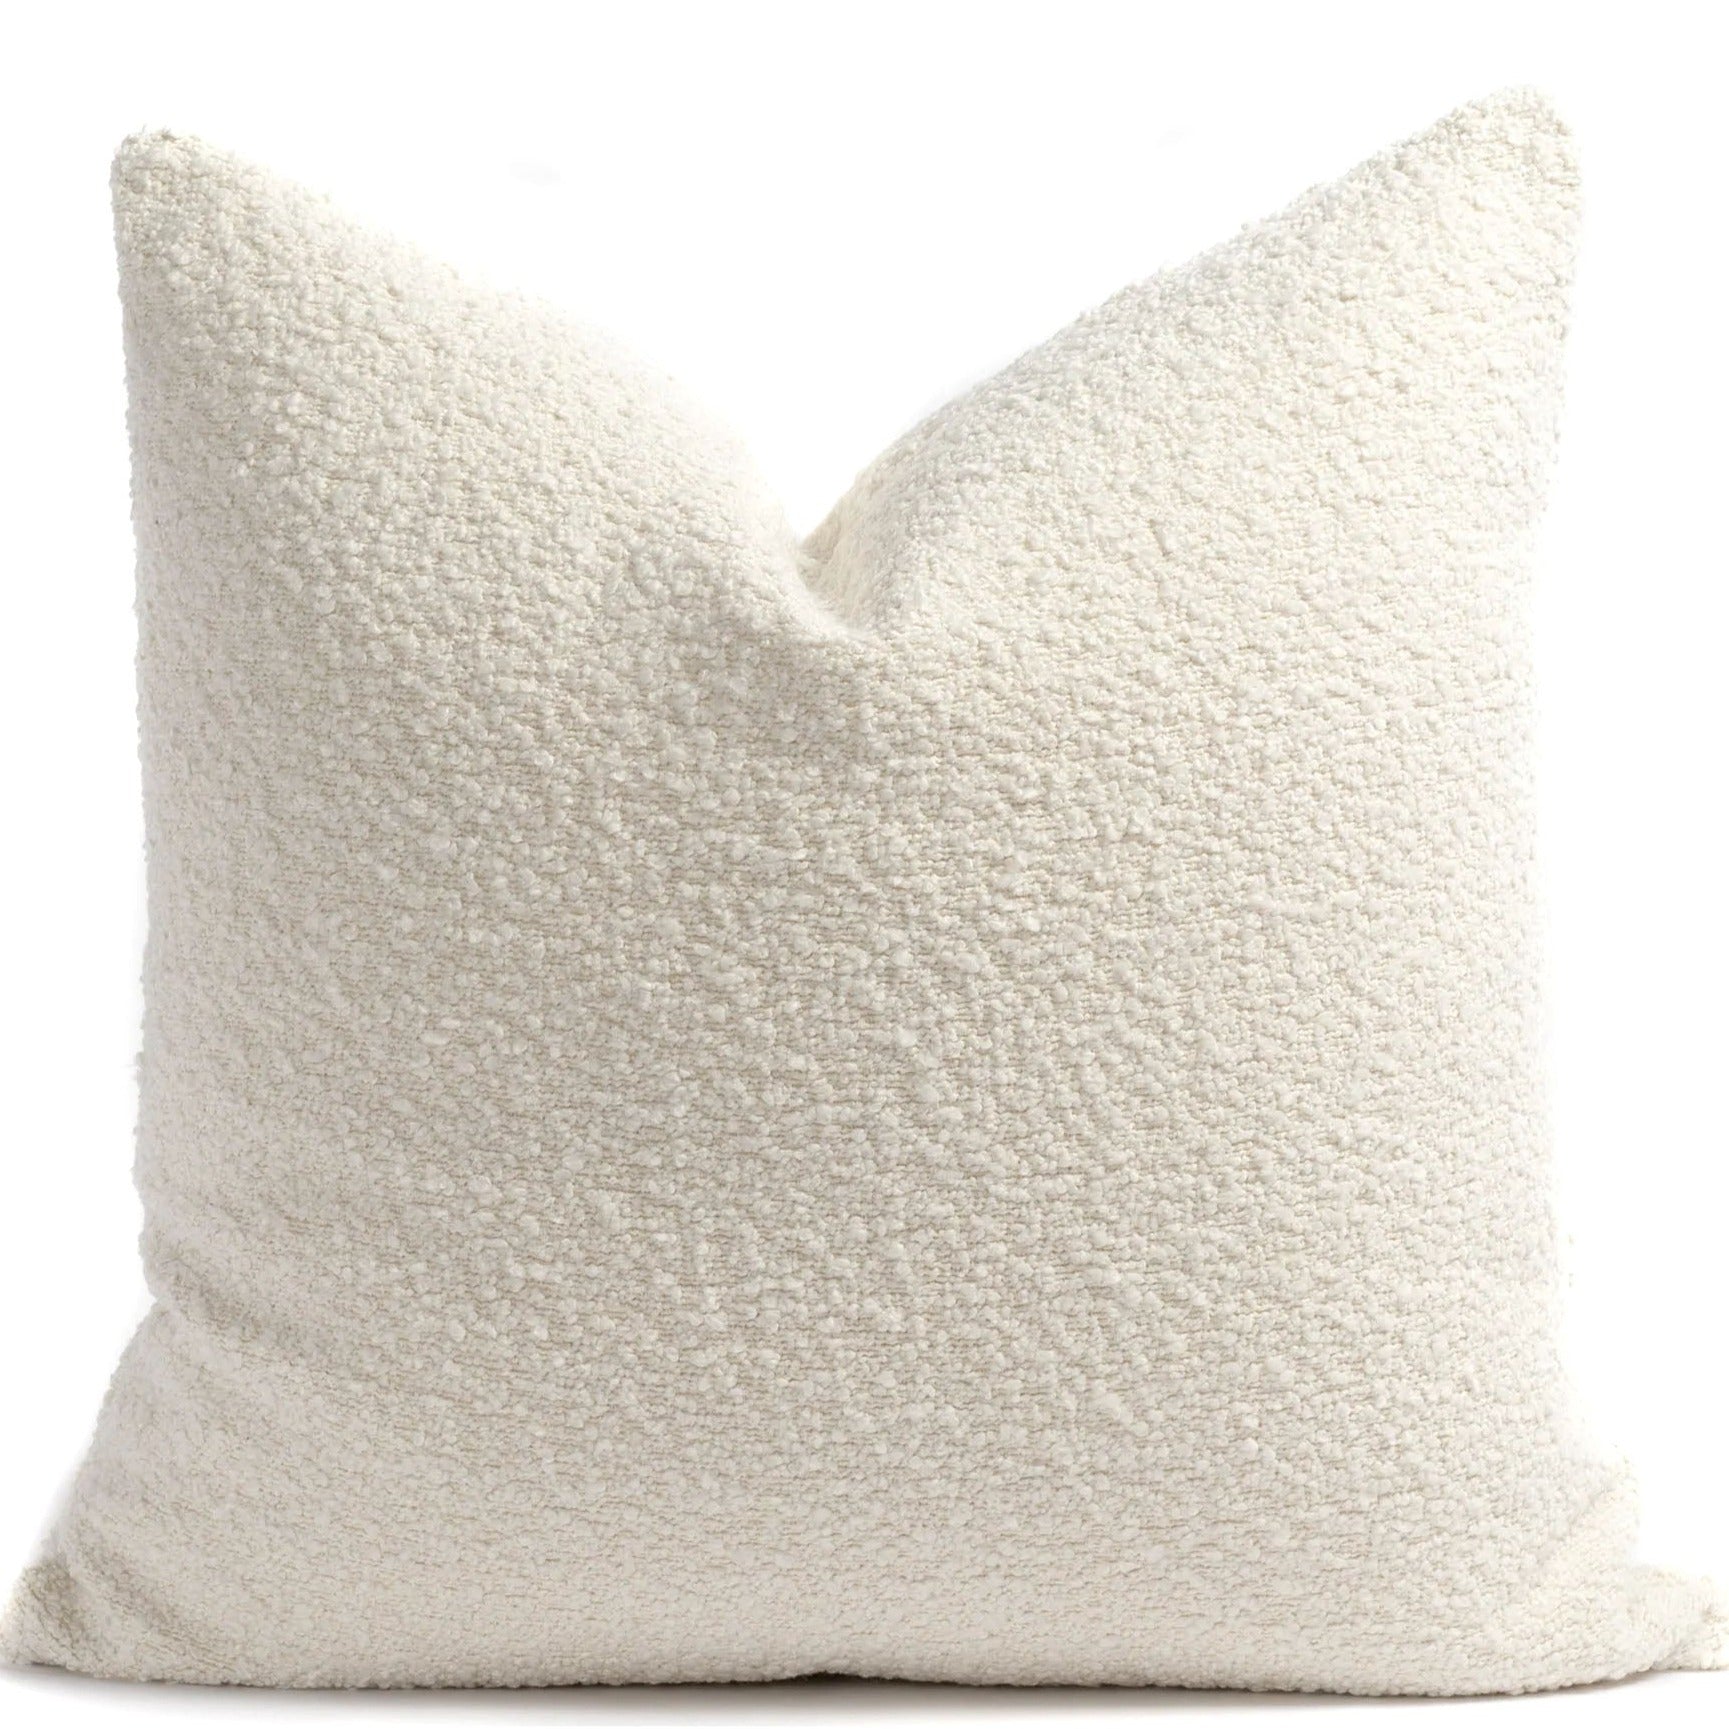 https://cdn.shopify.com/s/files/1/0943/3080/products/cambie_boucle_chalk_pillow_one_affirmationcopy.jpg?v=1687013902